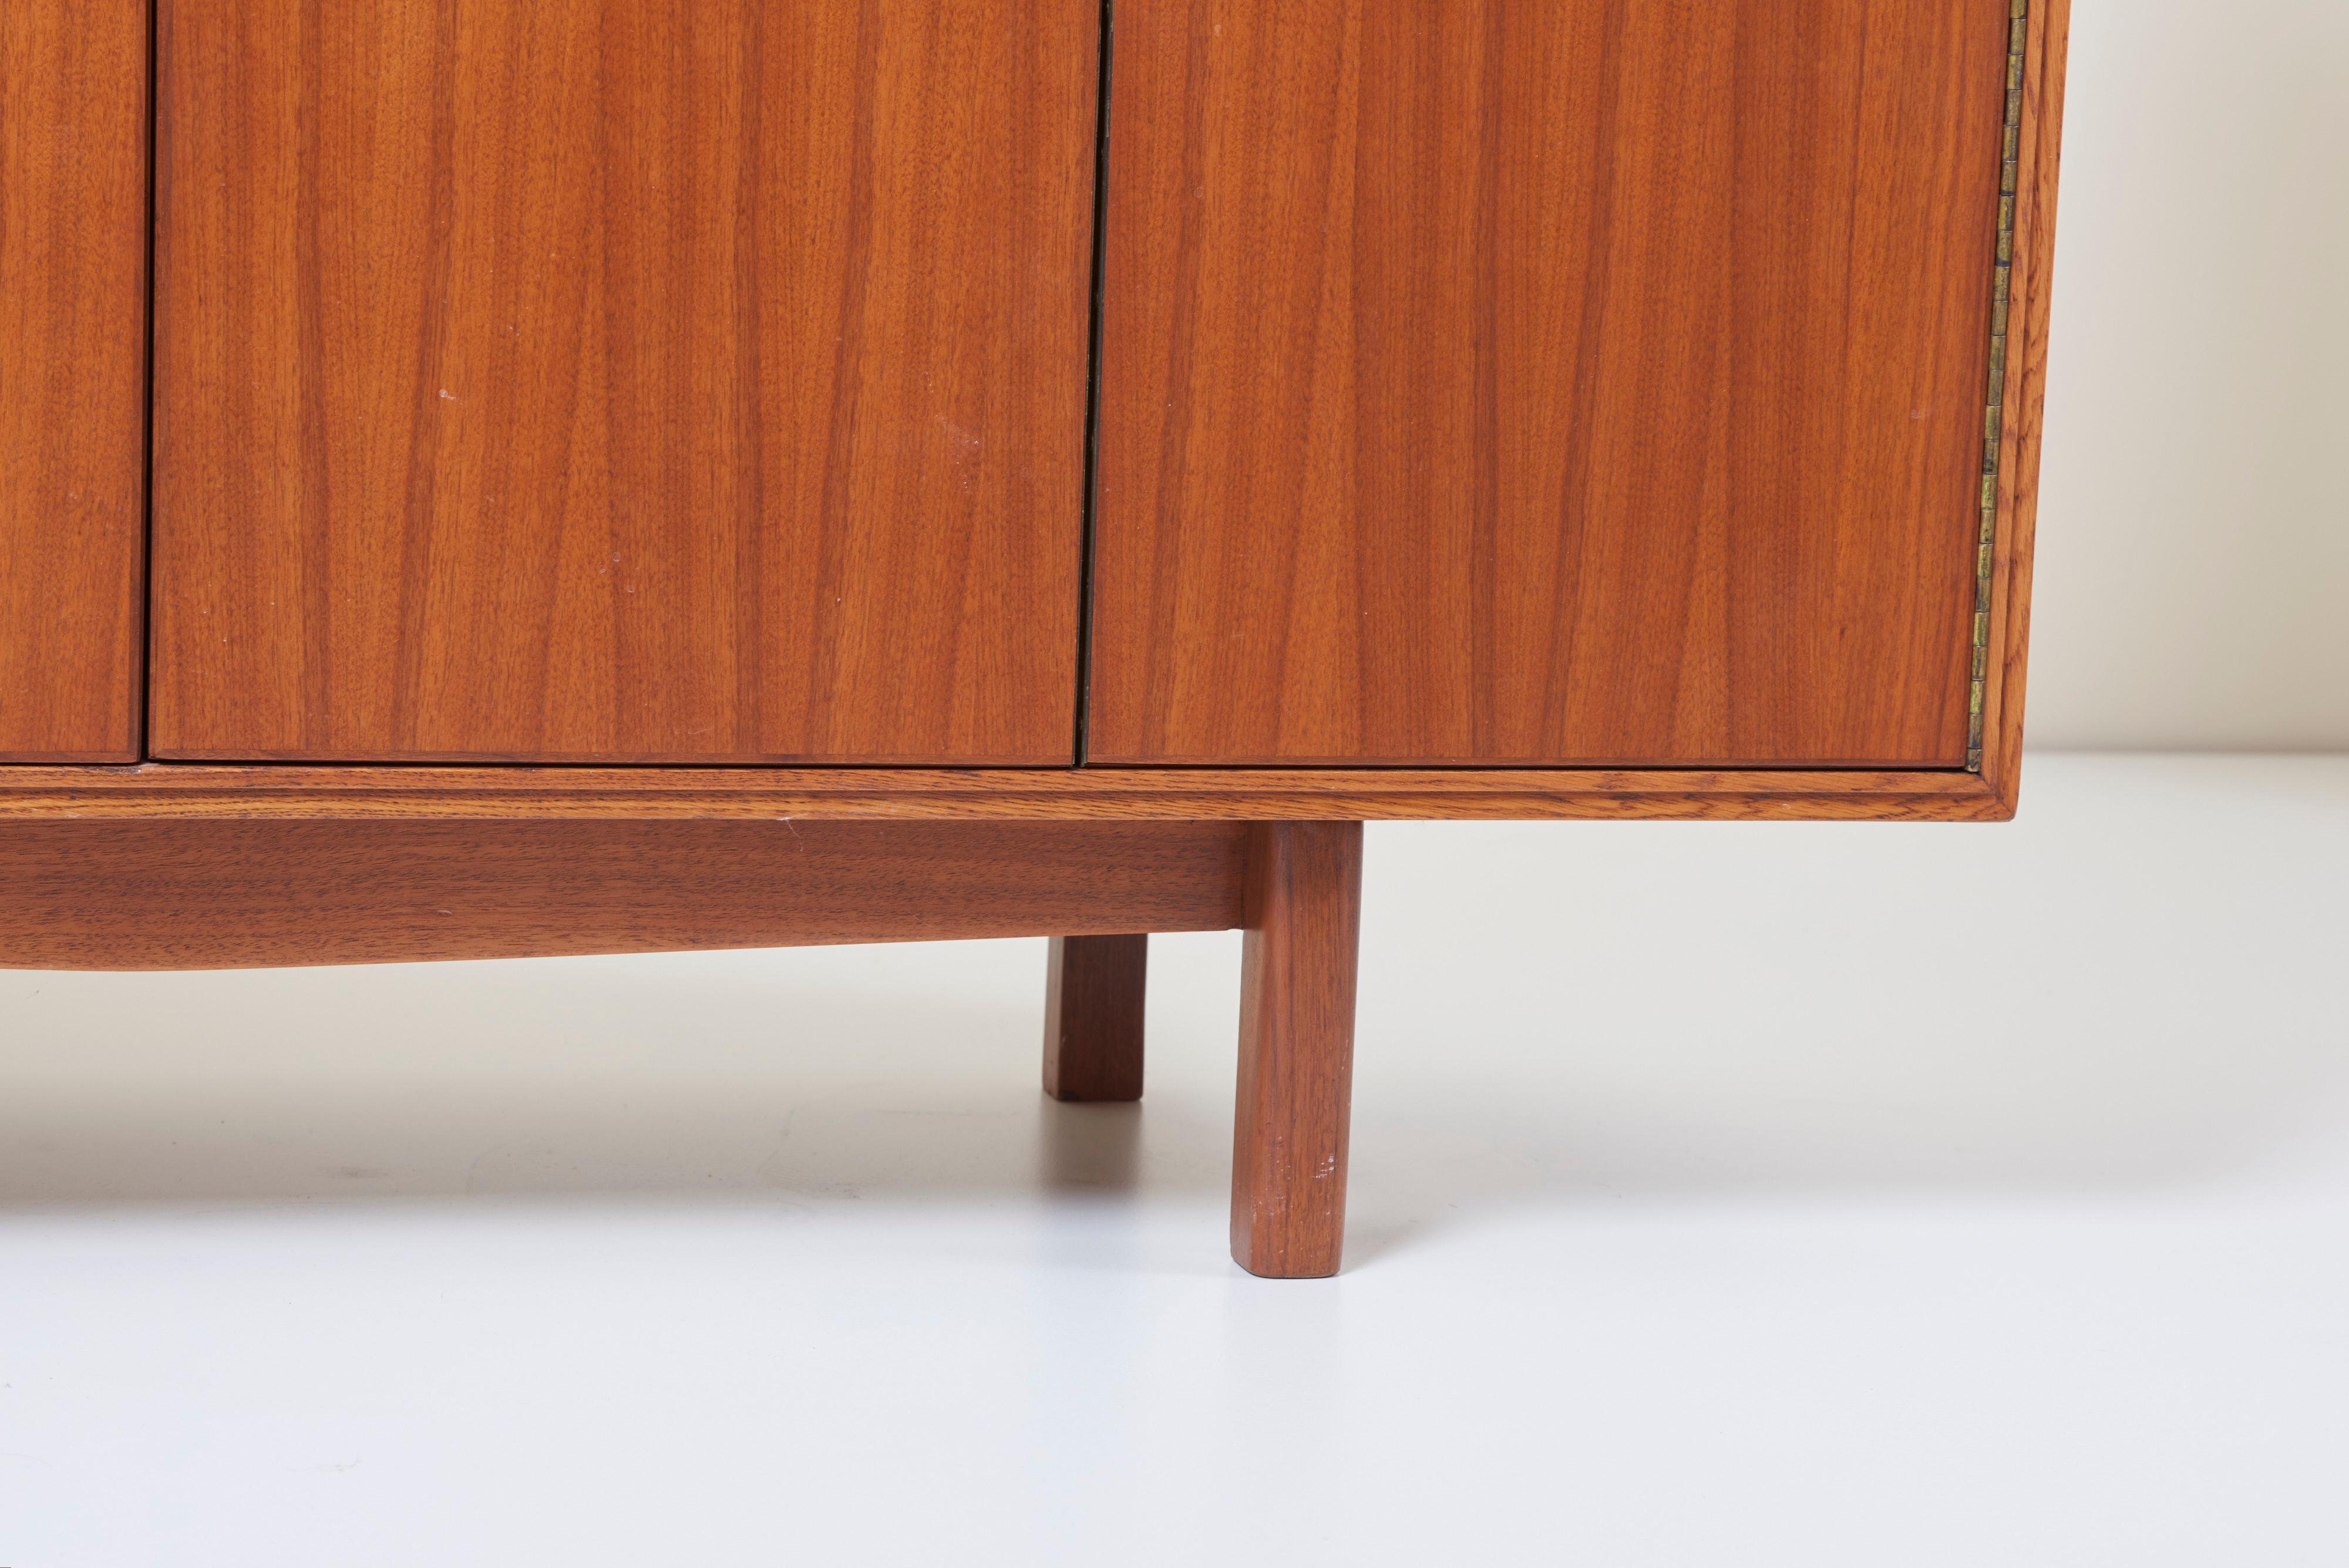 One of a Kind Studio Sideboard or Cabinet by John Kapel Studio, US, 1960s For Sale 7